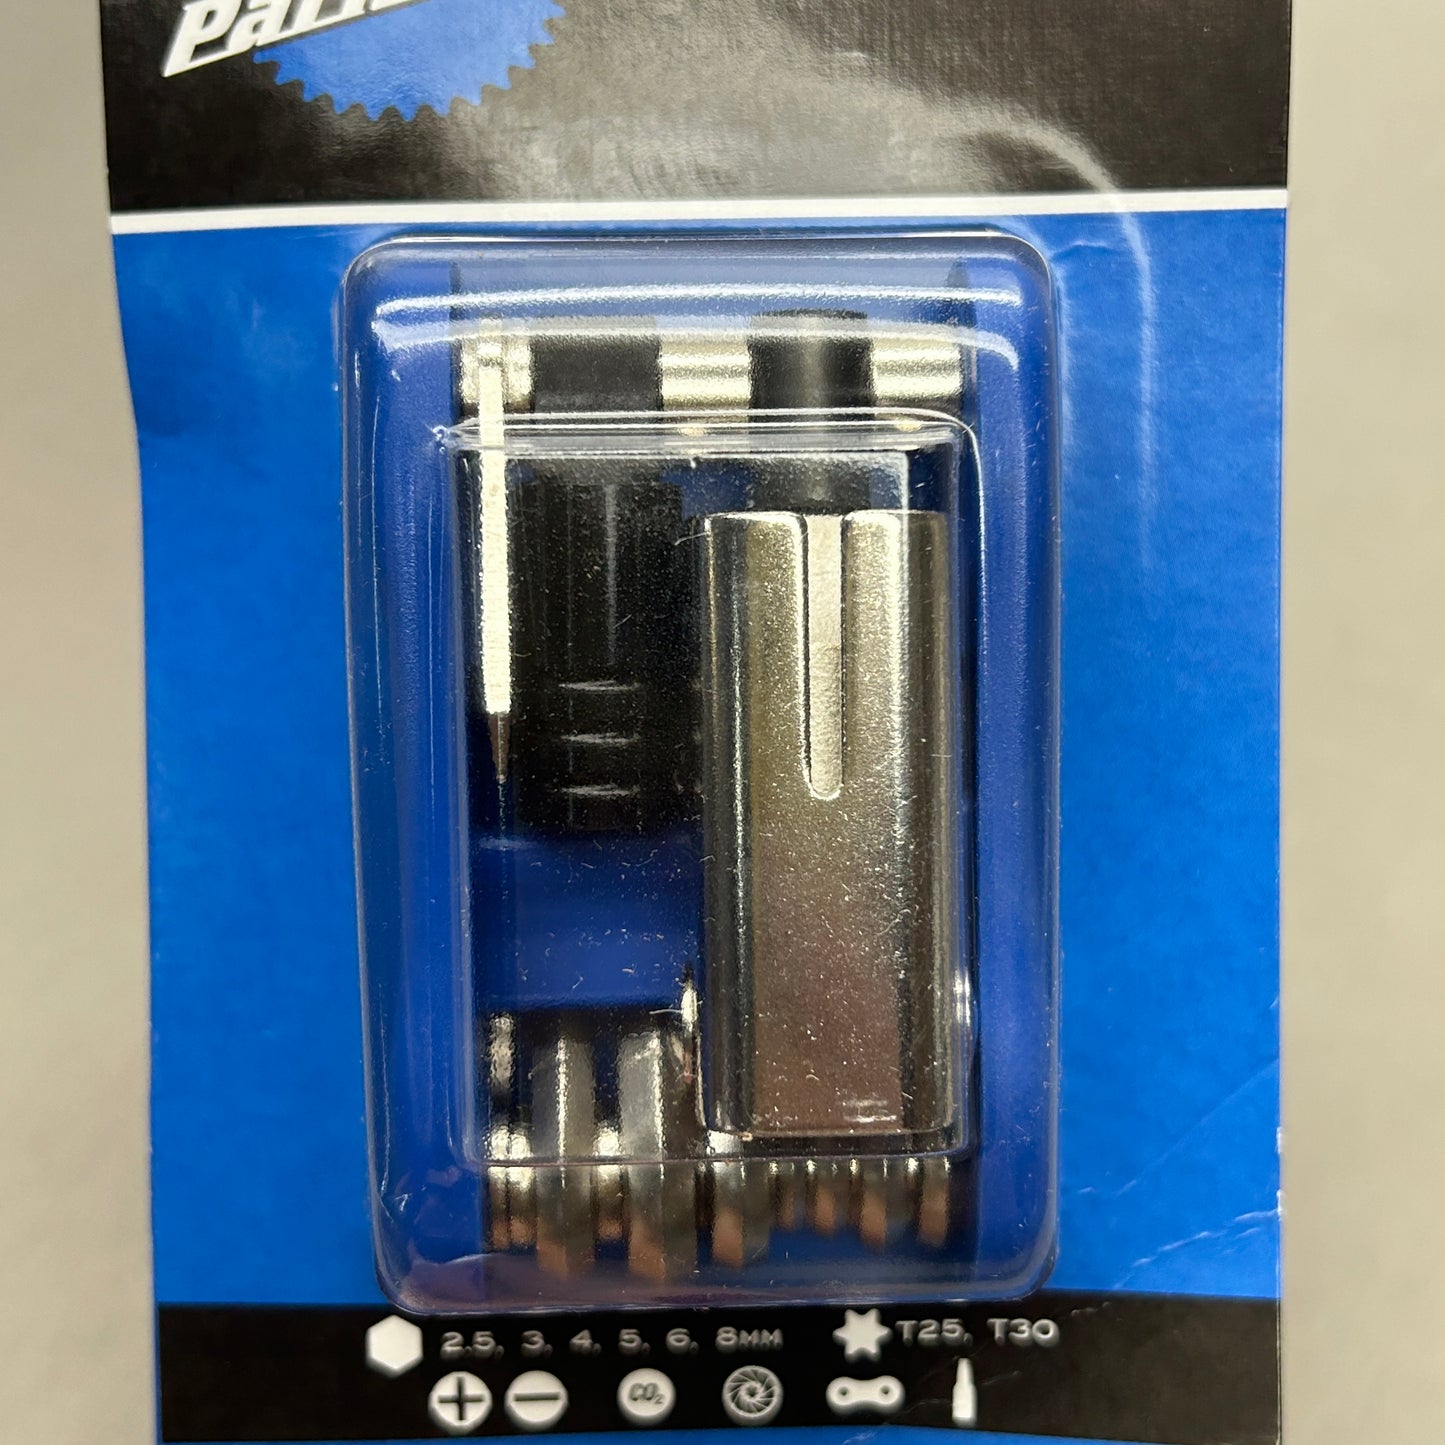 PARK TOOL Composite Multi-Function Tool Bicycle MTC-40 Blue (New)